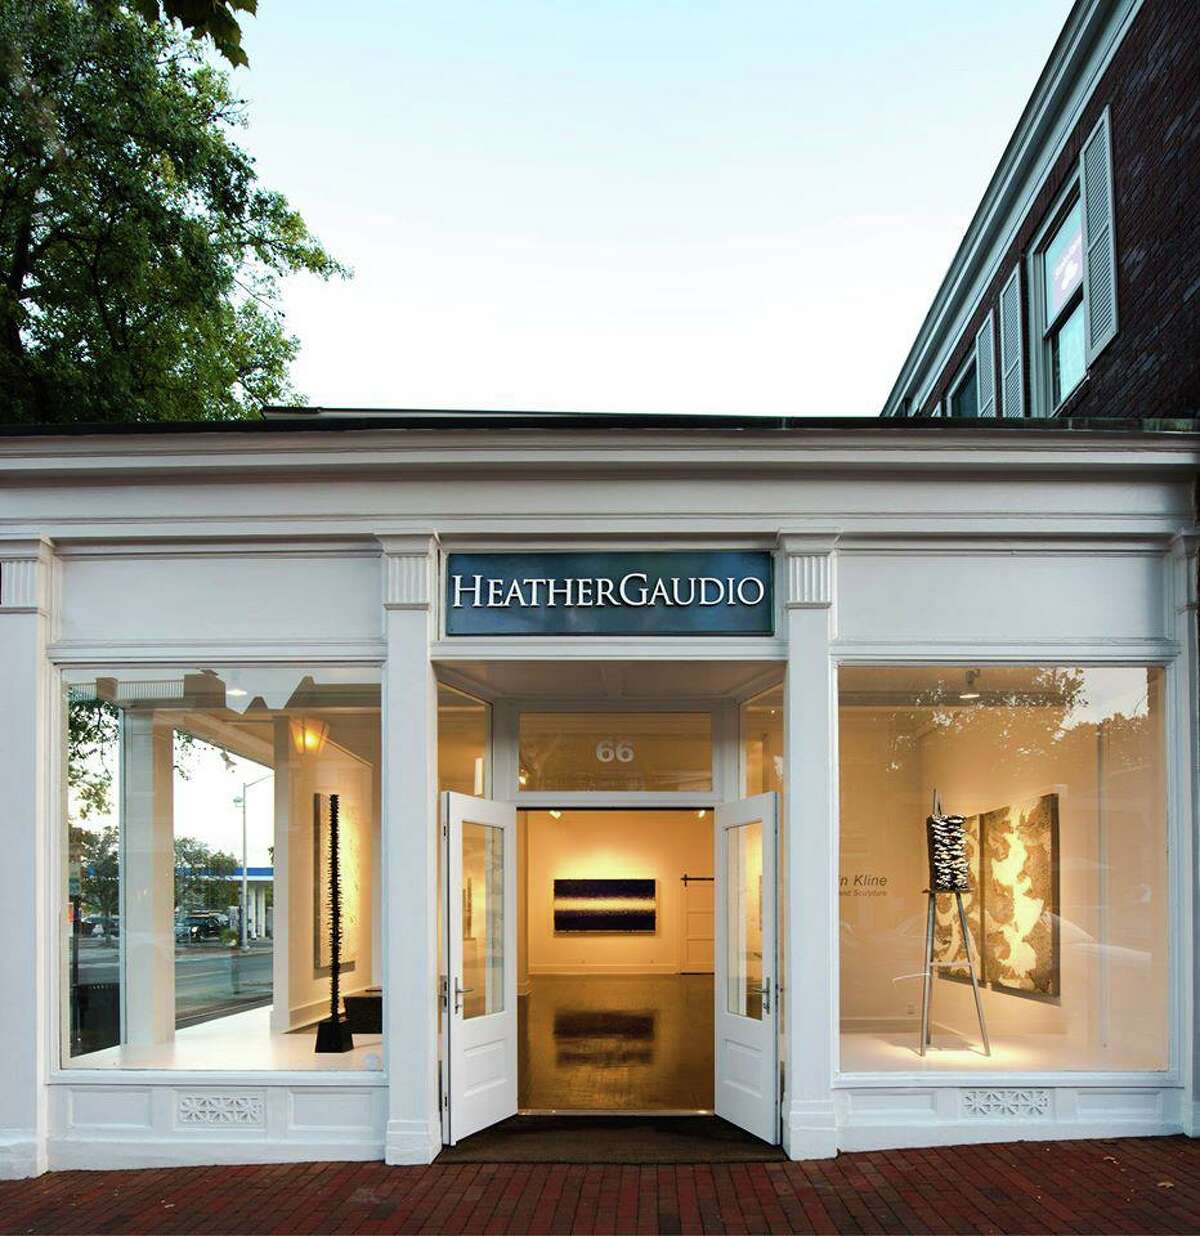 Heather Gaudio Fine Art, on Elm Street in New Canaan, has exhibits the should be viewed in person to be fully appreciated.